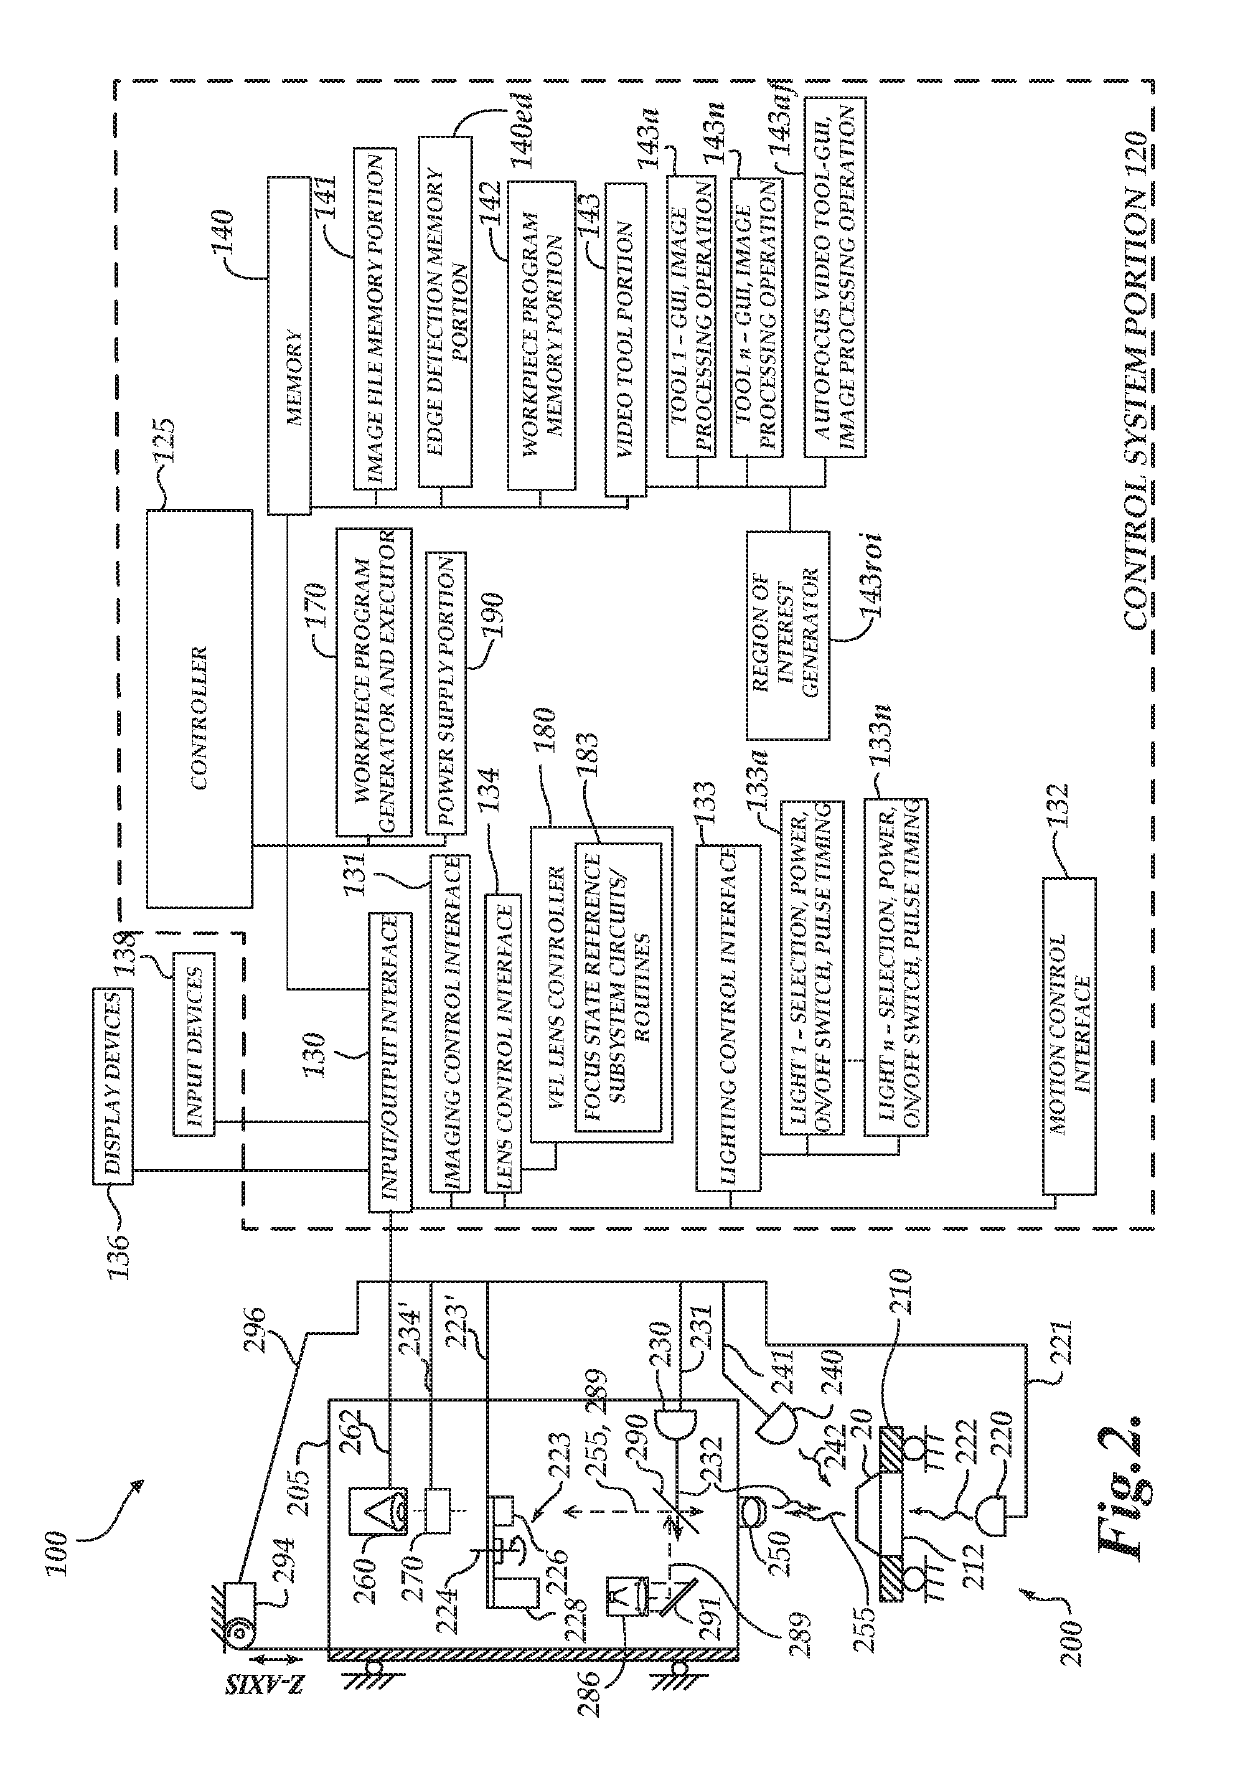 Variable focal length lens system including a focus state reference subsystem